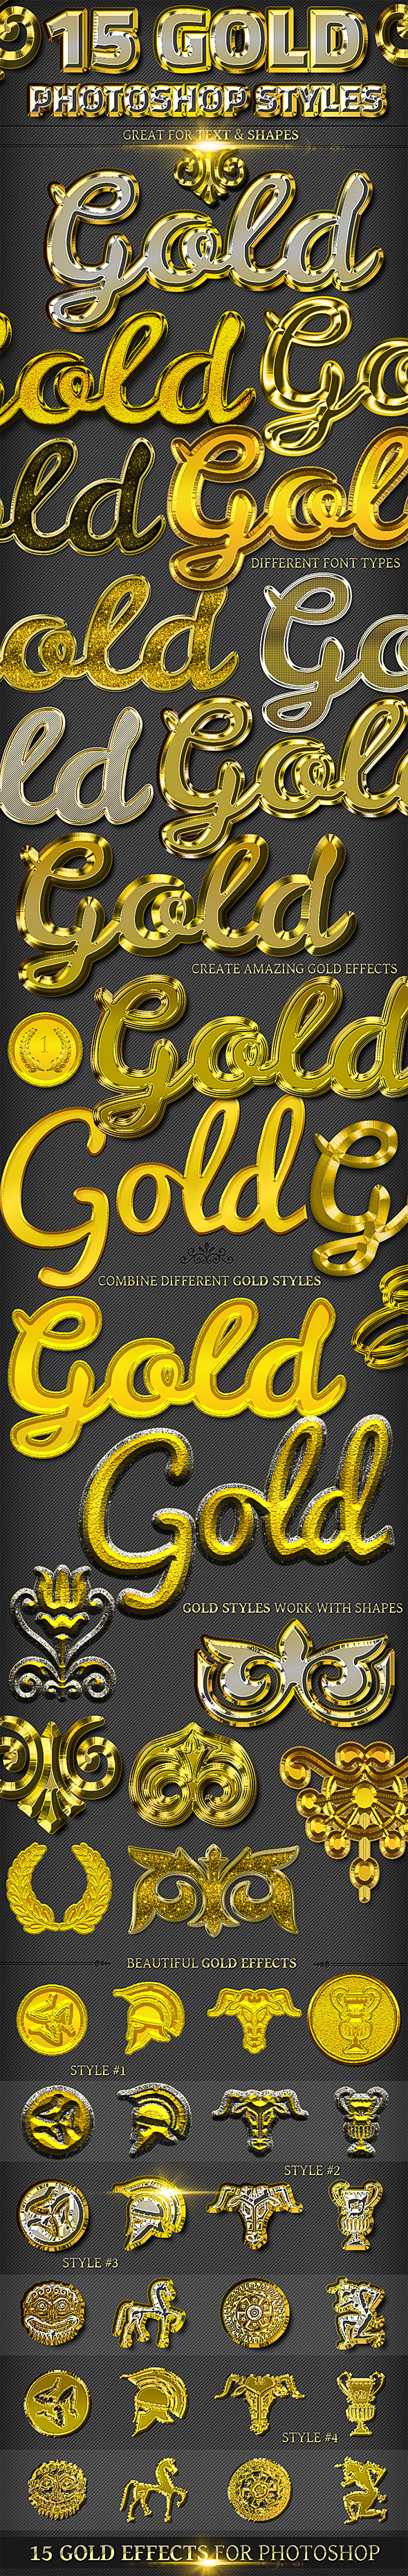 15 Gold Effect Photoshop Styles